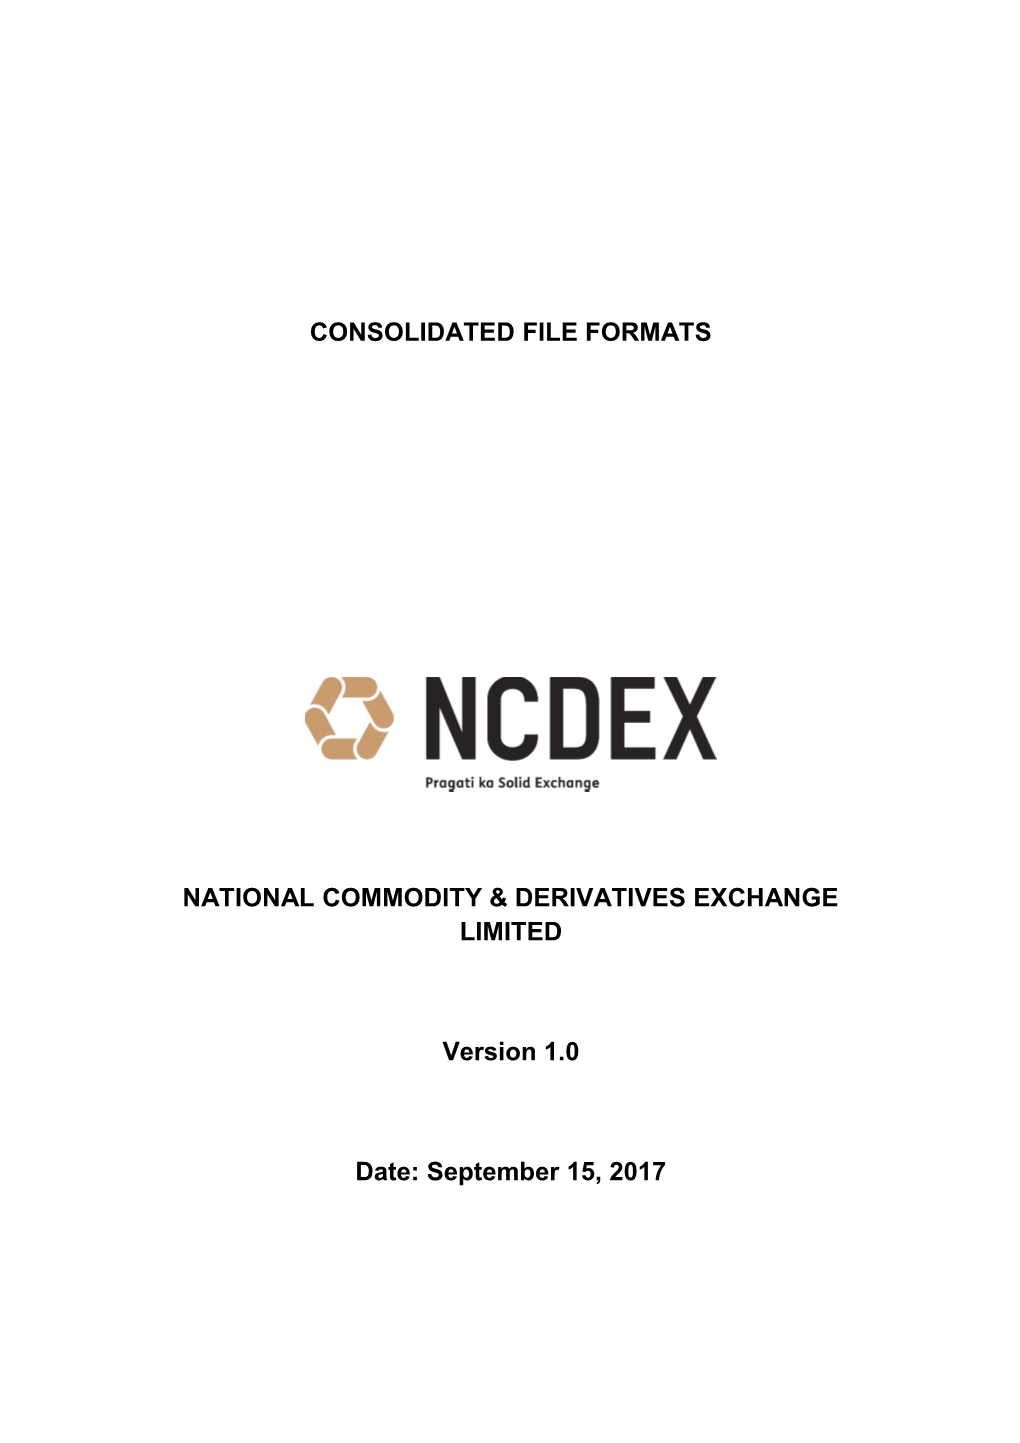 National Commodity & Derivatives Exchange Limited